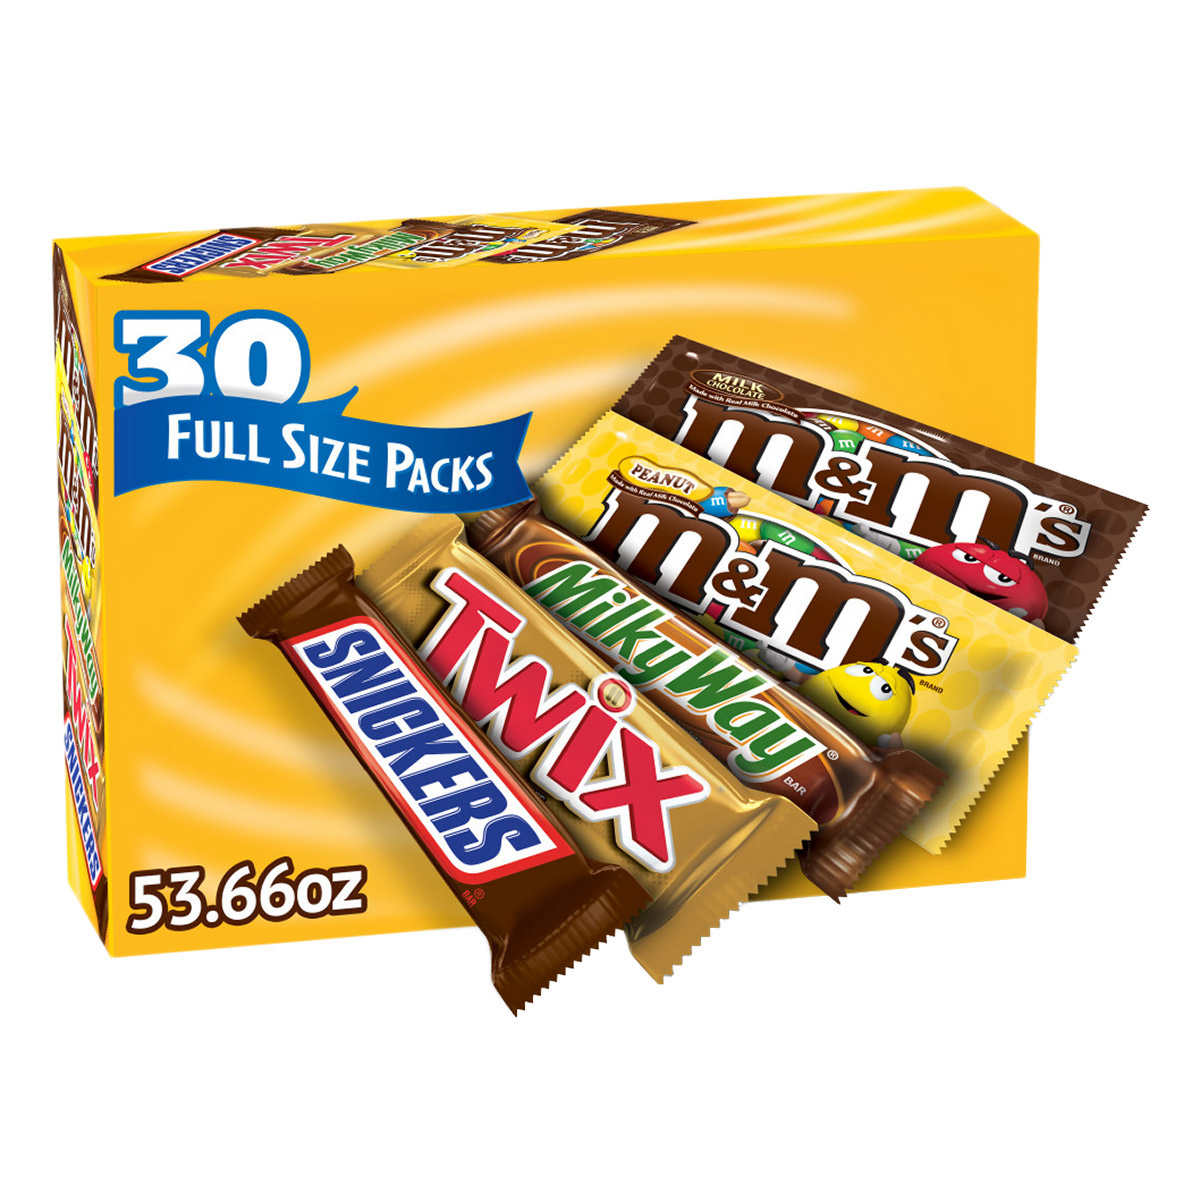 M&M's Snickers and More Chocolate Candy Bars, Variety Pack